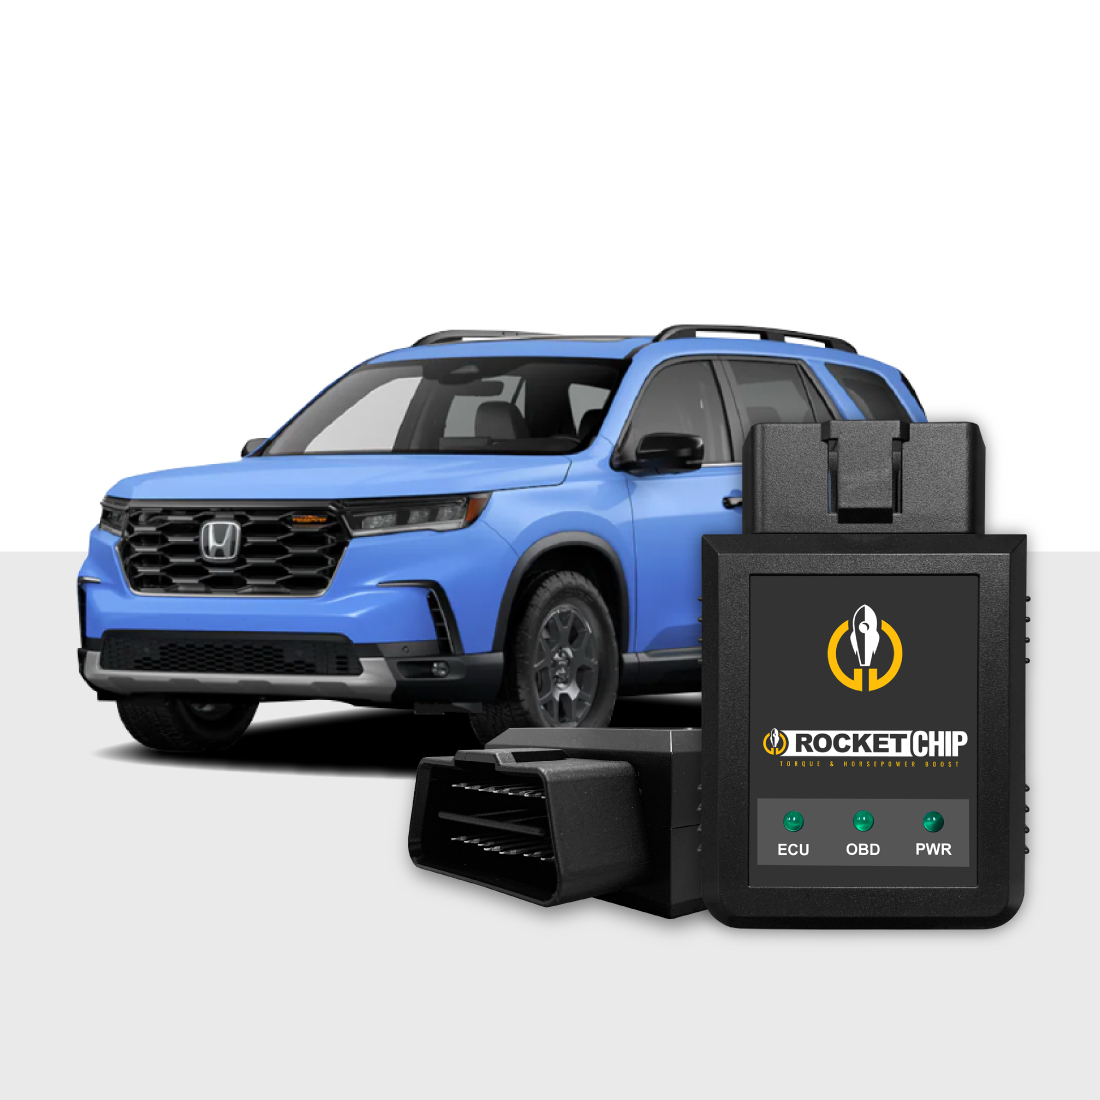 Blue Honda SUV with a Rocket Chip performance chip, that is black in color